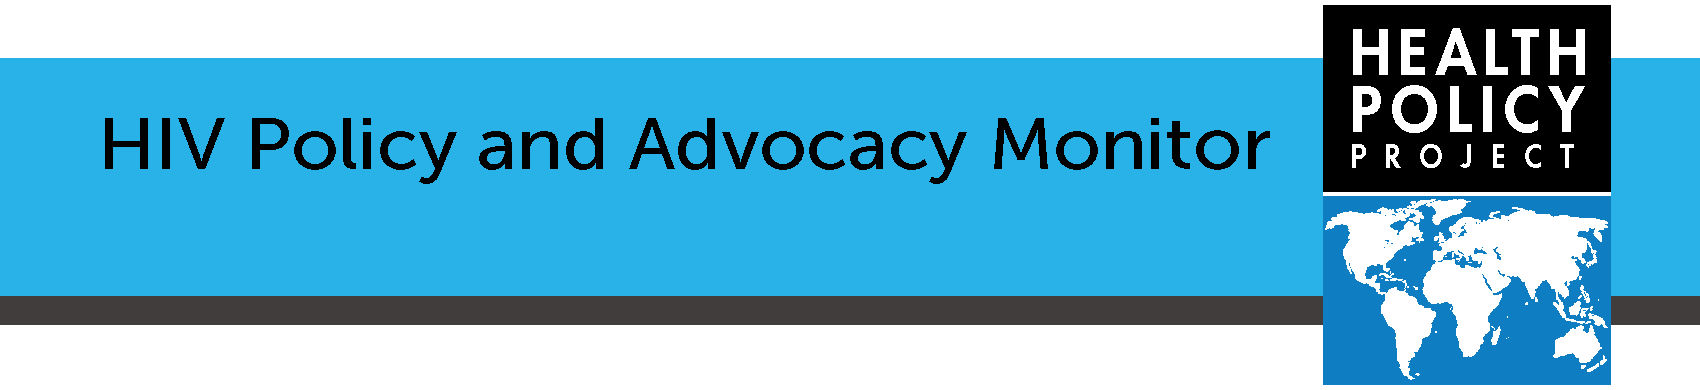 HIV Policy and Advocacy Monitor